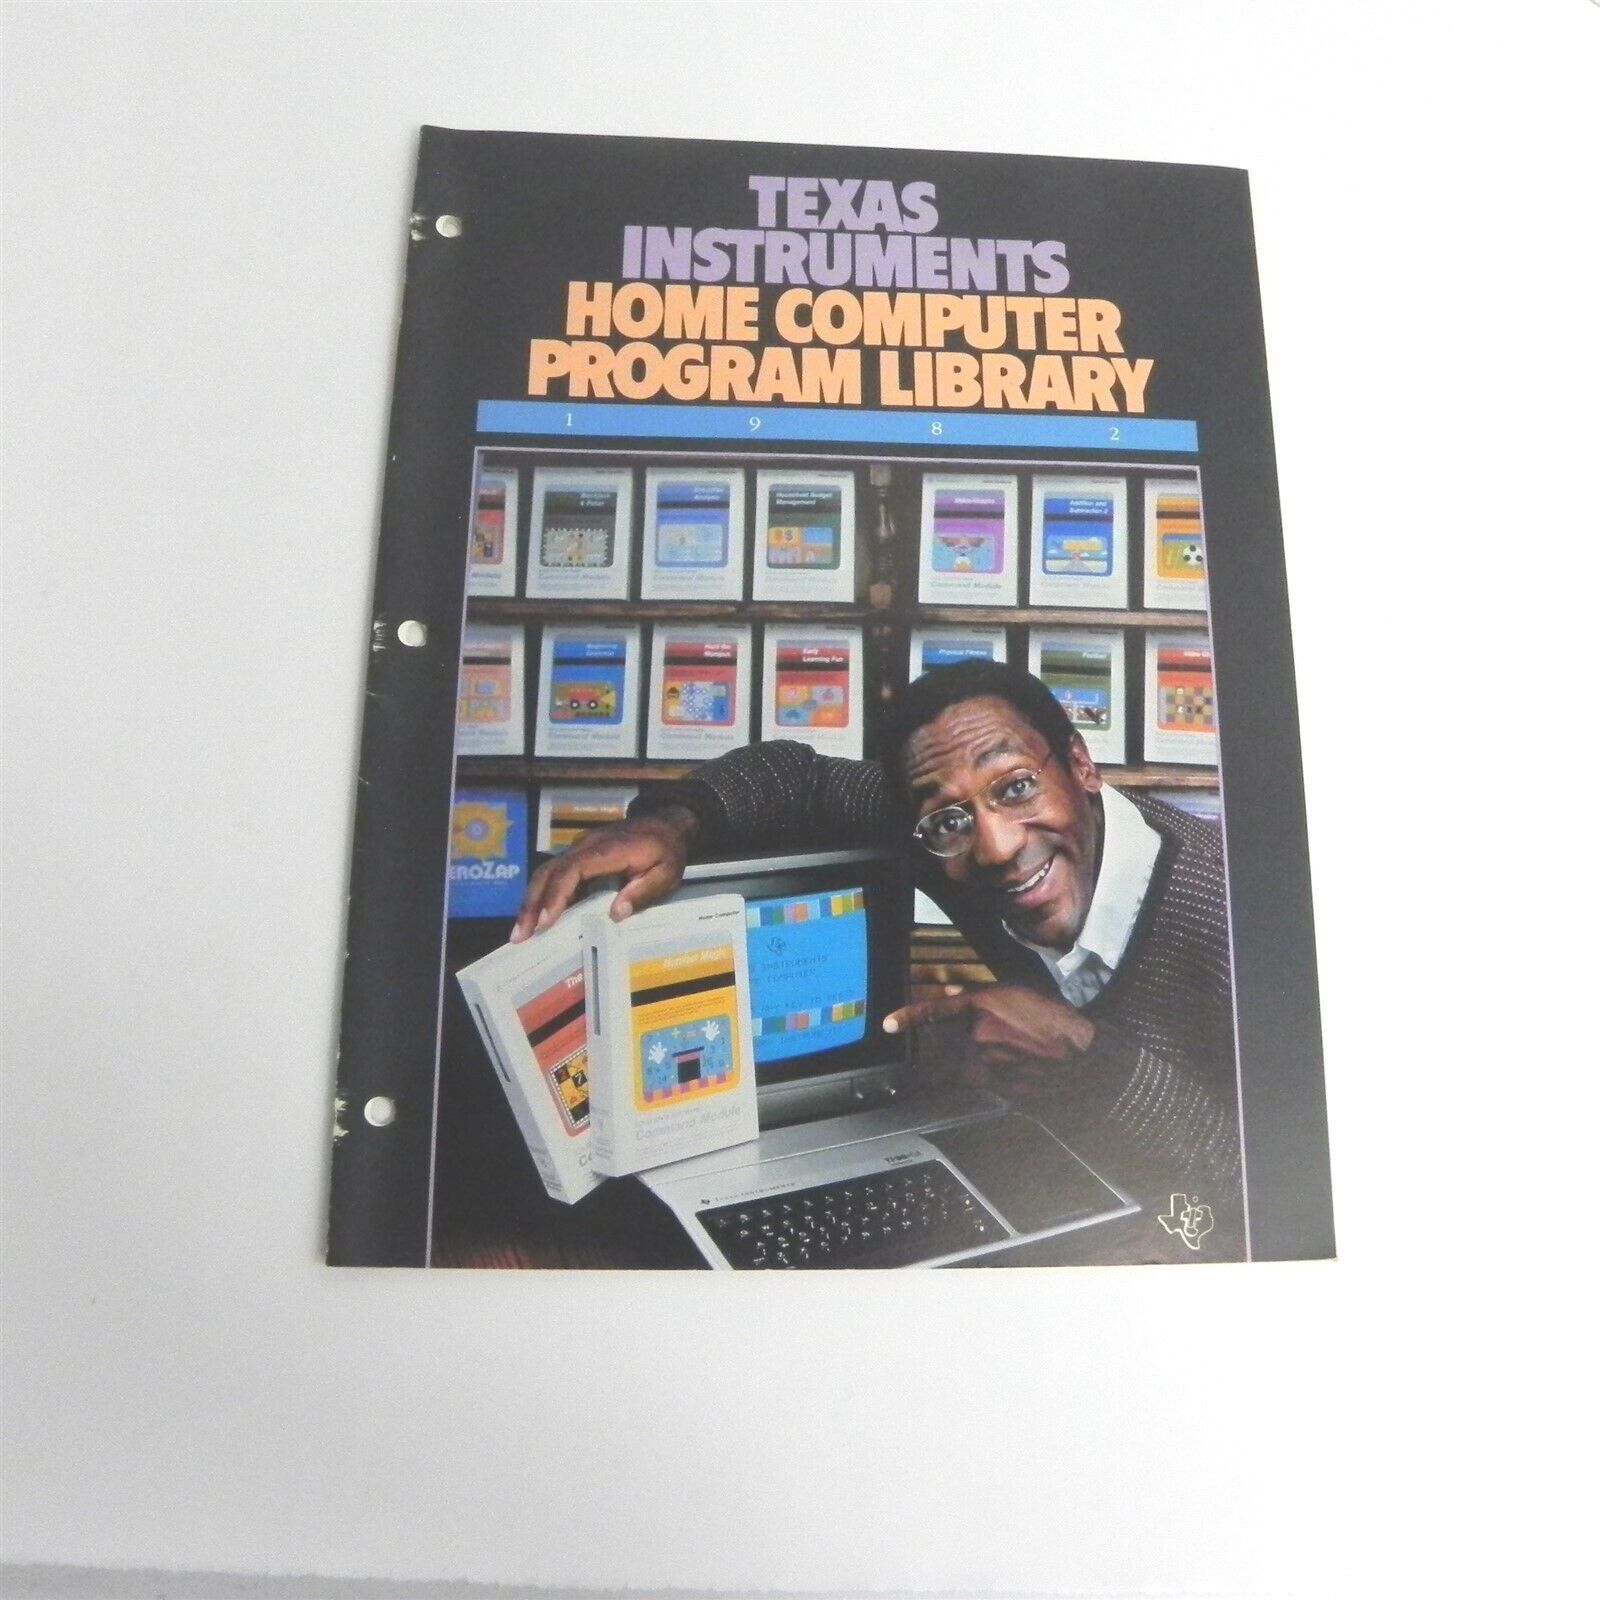 VTG 1982 TEXAS INSTRUMENTS HOME COMPUTER PROGRAM LIBRARY CATALOG WITH BILL COSBY